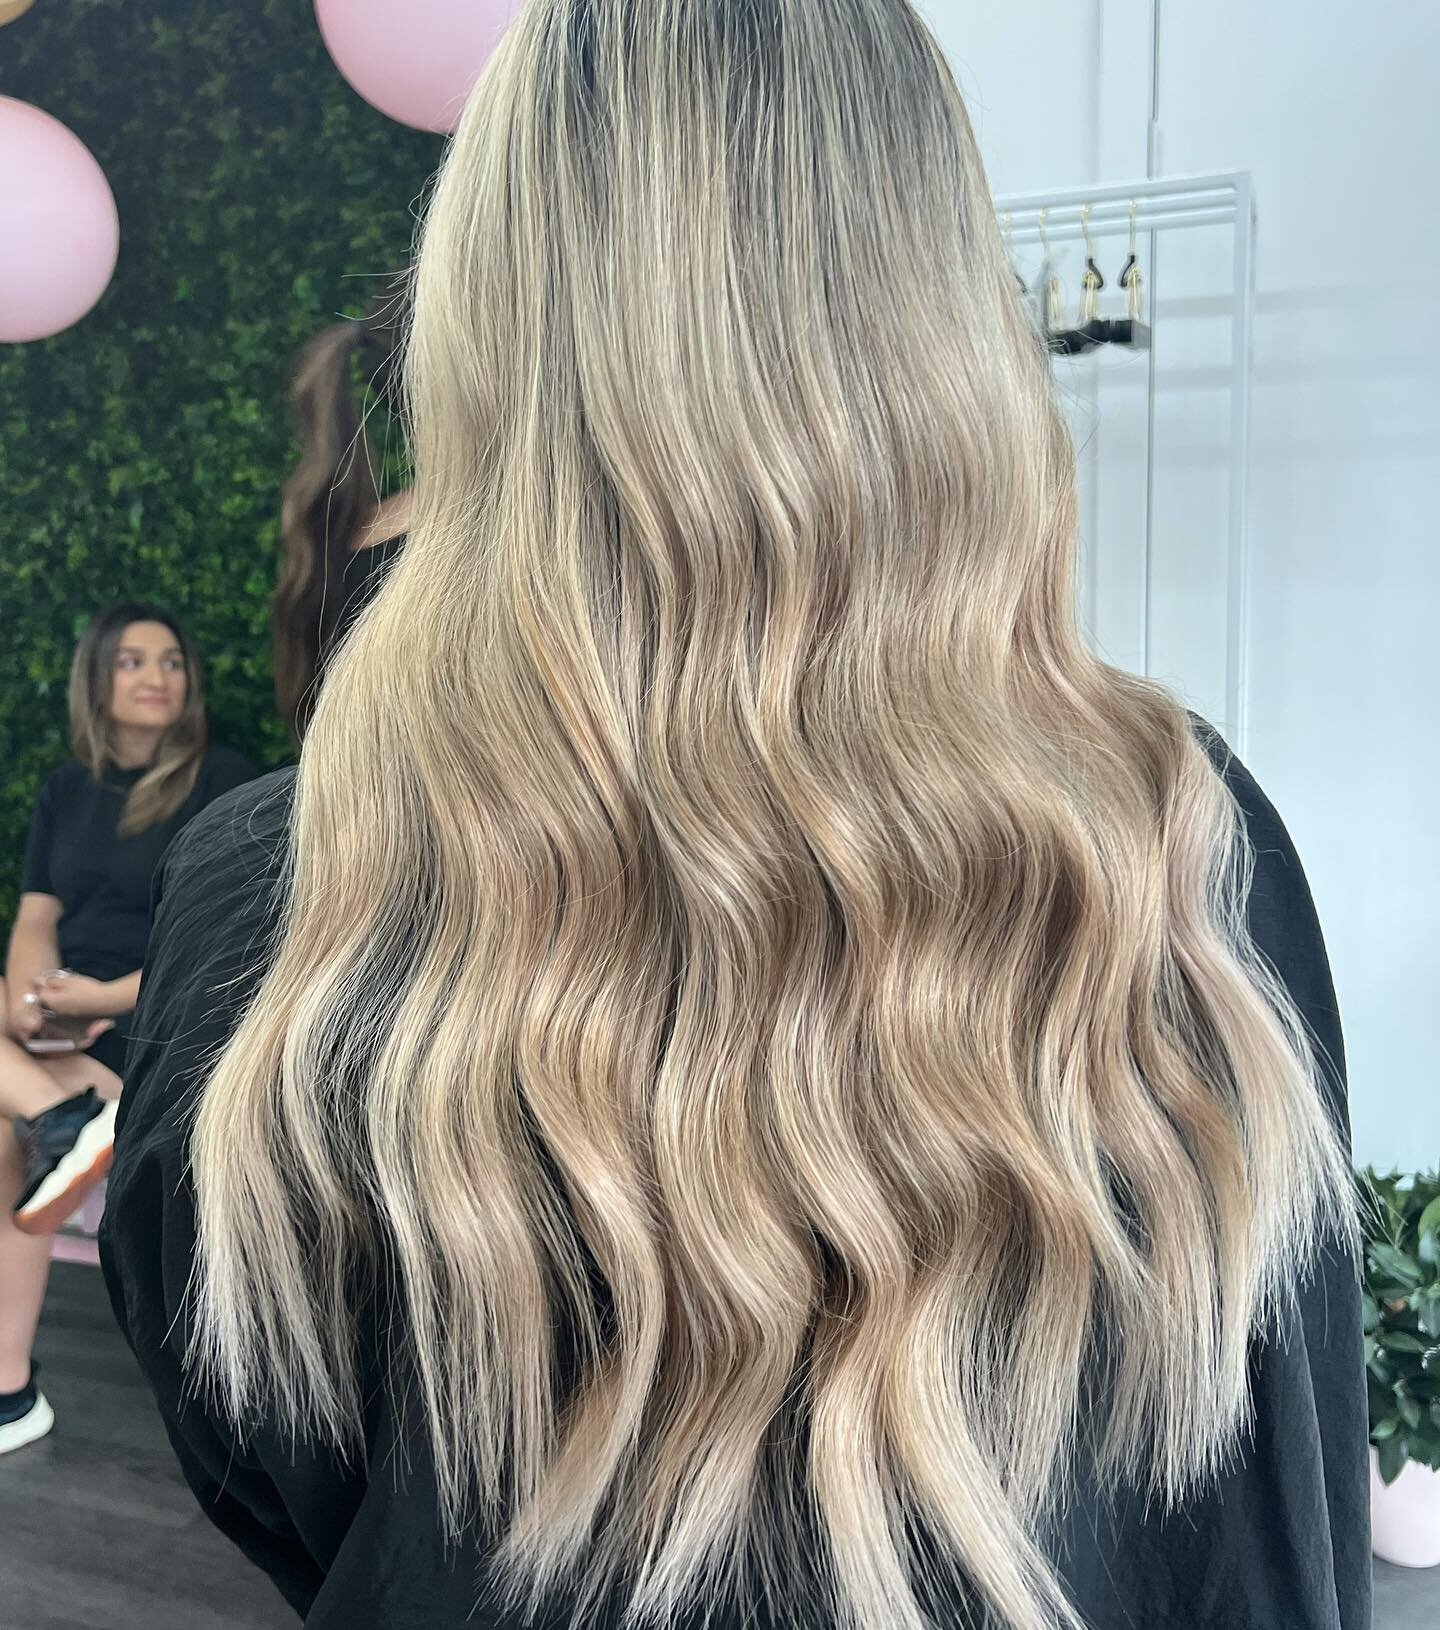 M I R A C L E  W E F T ✨ 50grams for thickness, lightness &amp; length .. &lt;&lt; for before. Thinking about extensions? We have an intro special for April! DM for more info ❤️